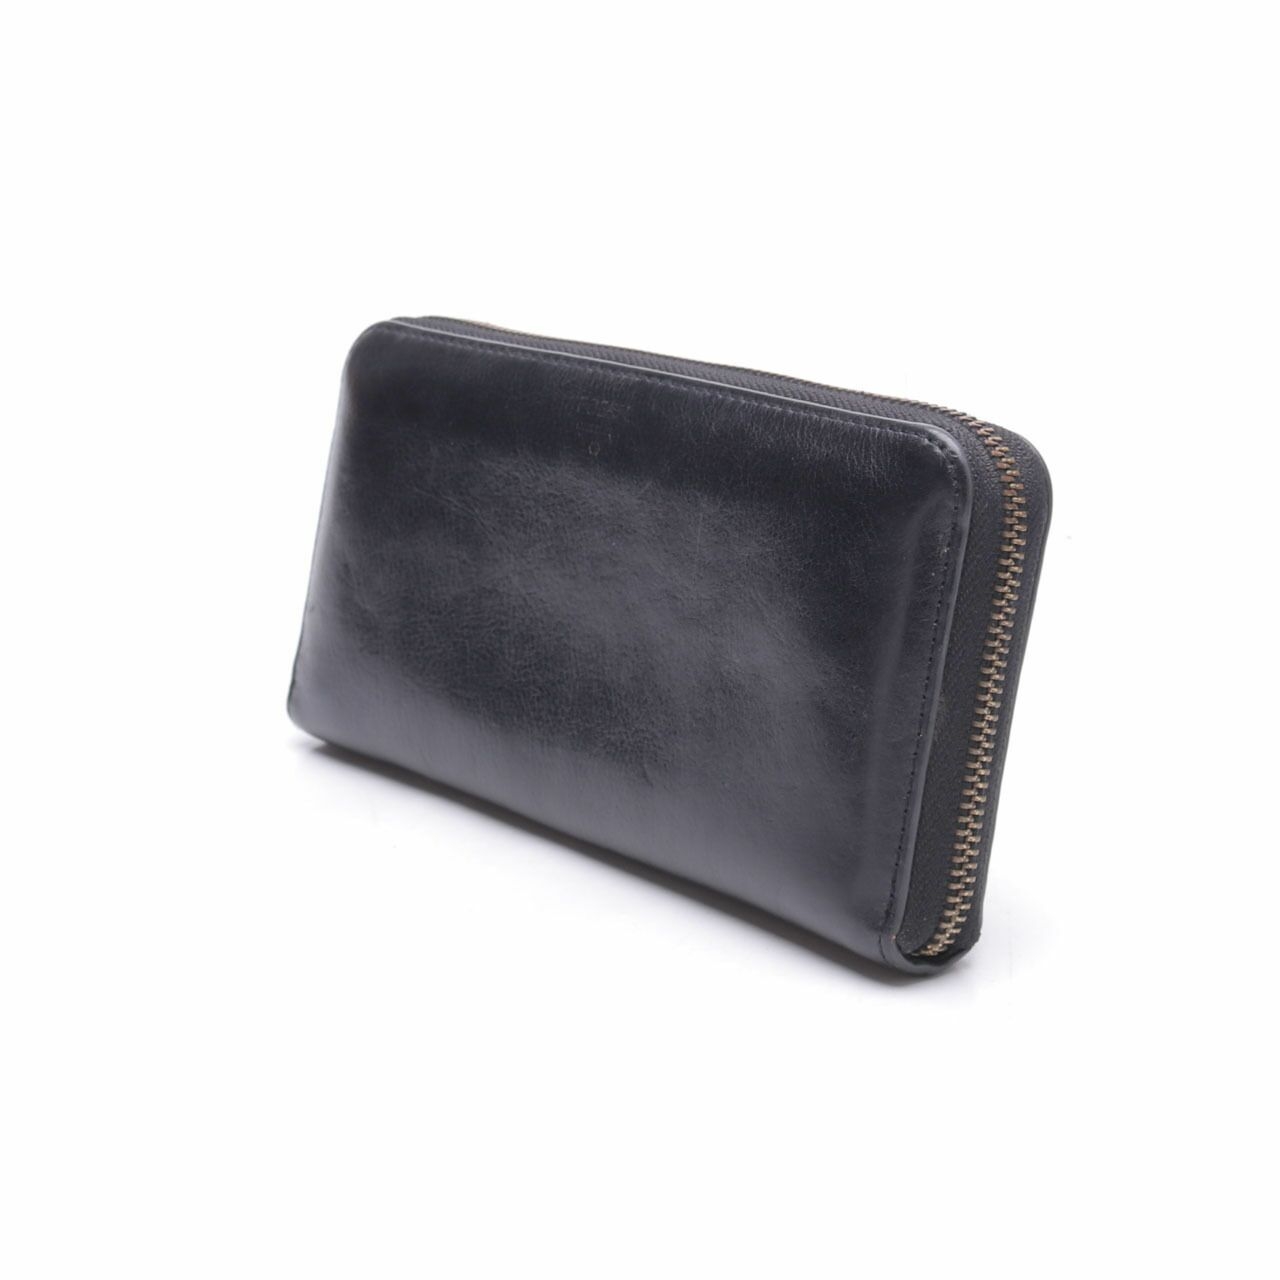 Fossil Sydney Leather Double Accordion Shell Black Wallet